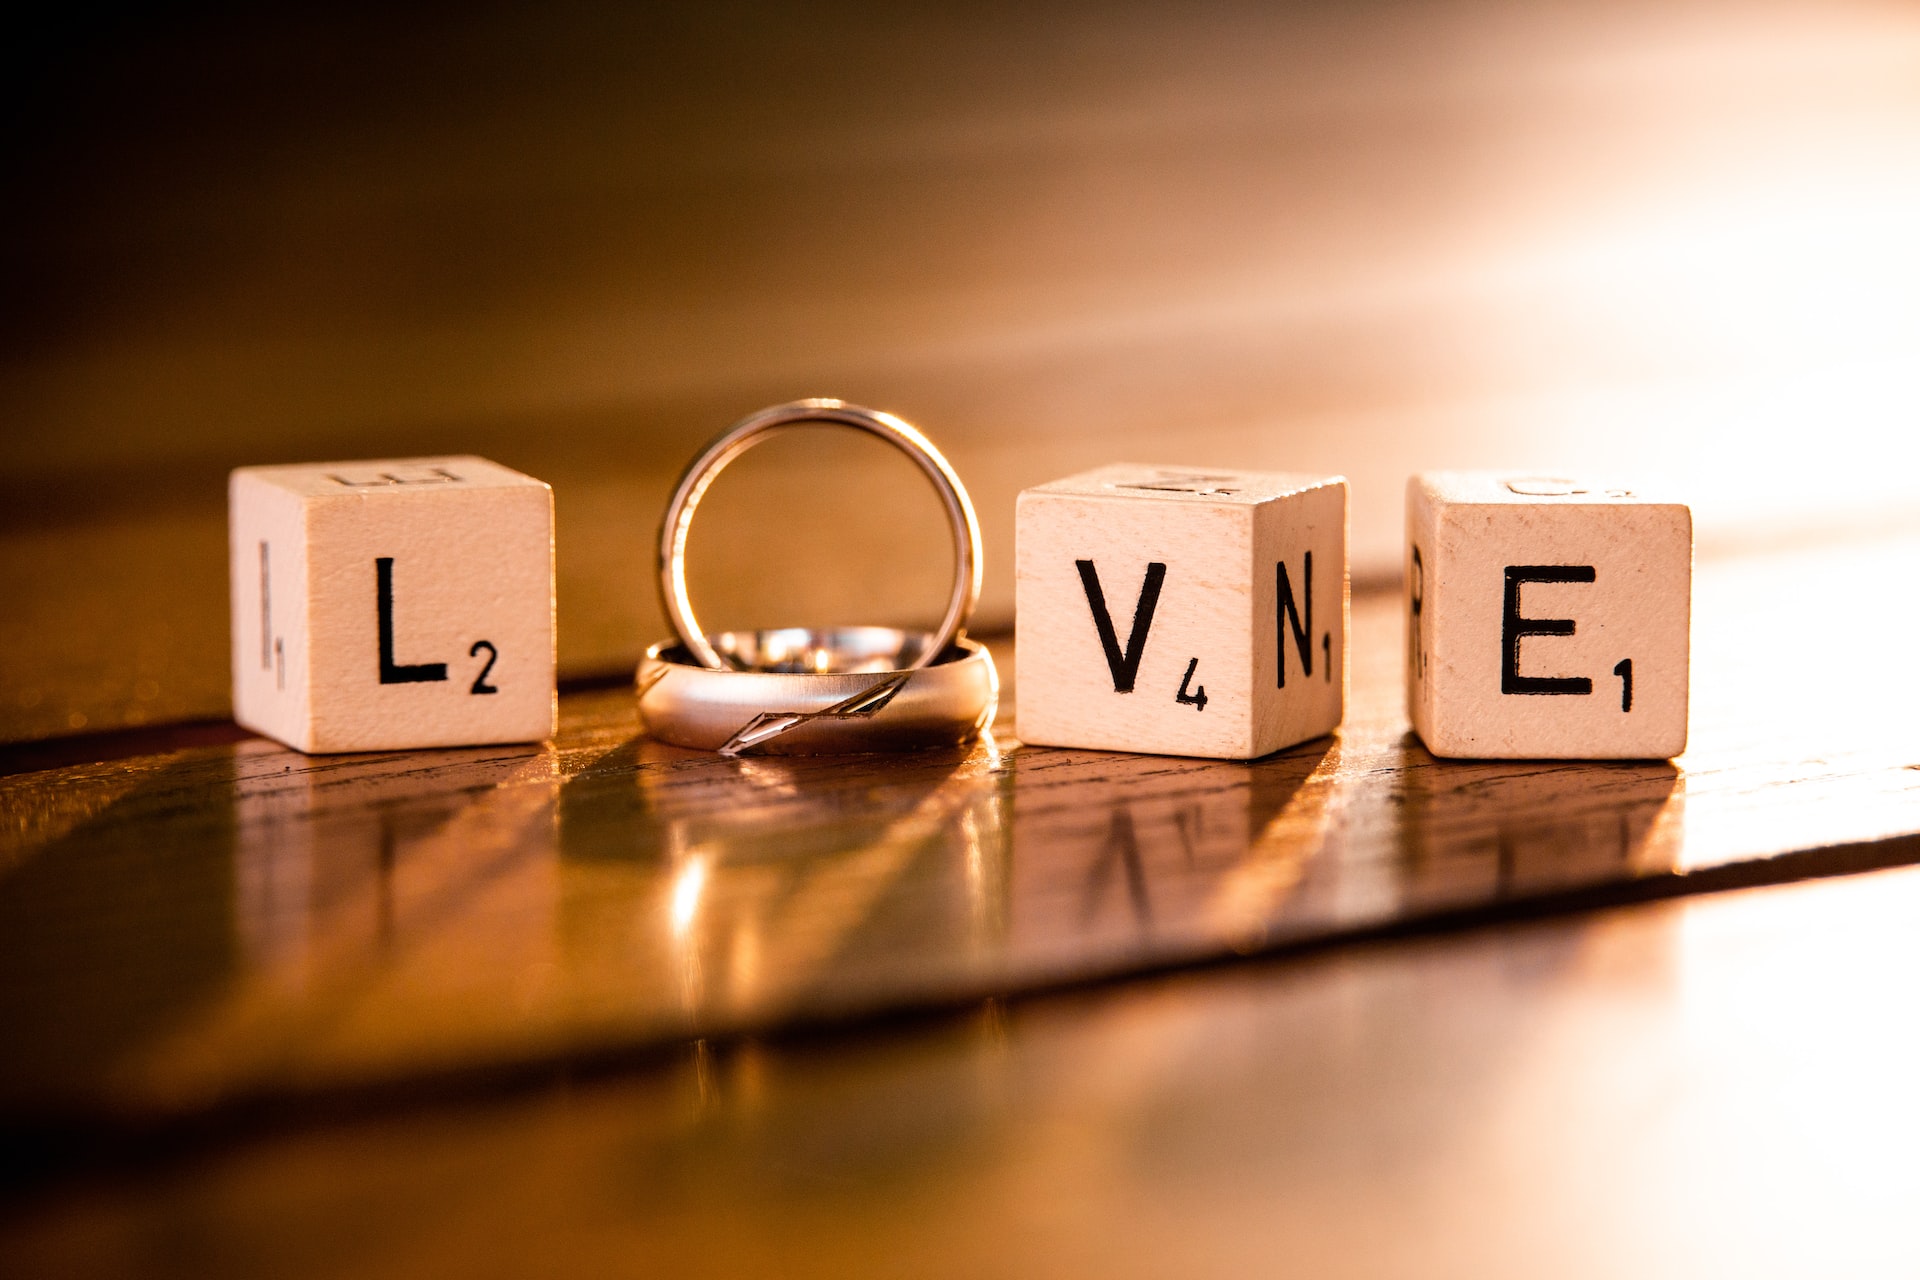 Items on a table create 'Love' - spelled with scrabble-like cubes for the L, V, E, and two rings used to create the O.